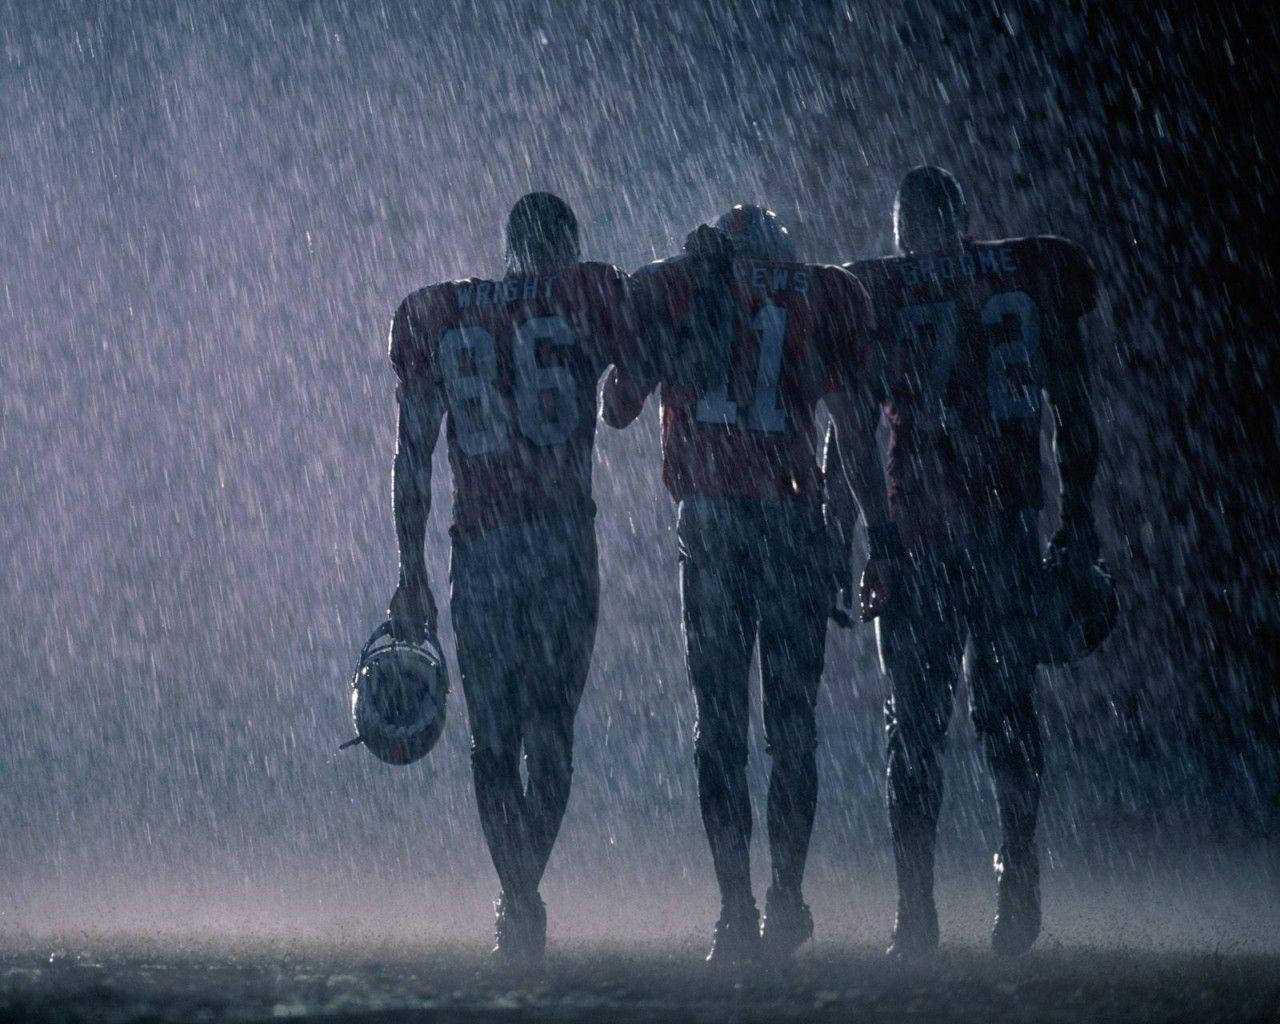 Nfl Football Players In The Rain